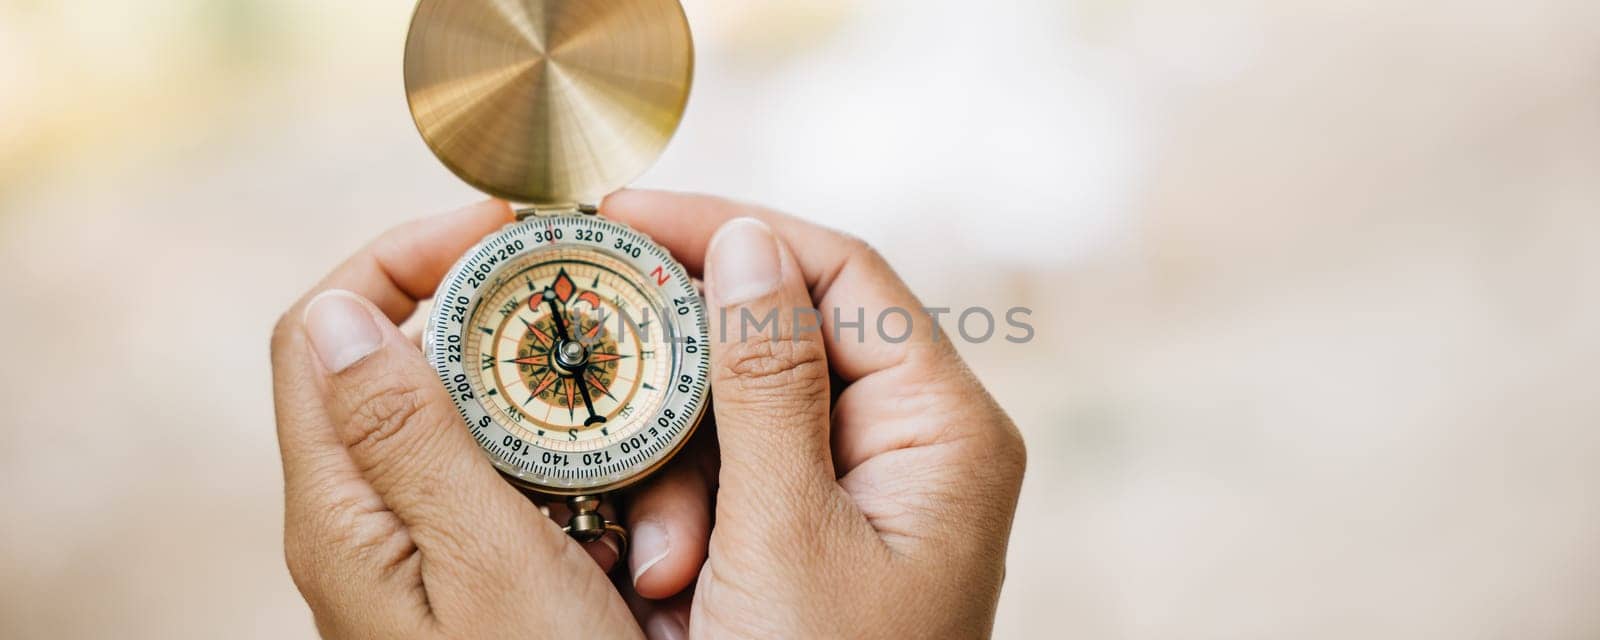 Surrounded by the beauty of nature a woman's hand grips a compass in a tranquil forest and lake setting. The image symbolizes guidance and the exciting spirit of exploration amidst the outdoors. by Sorapop